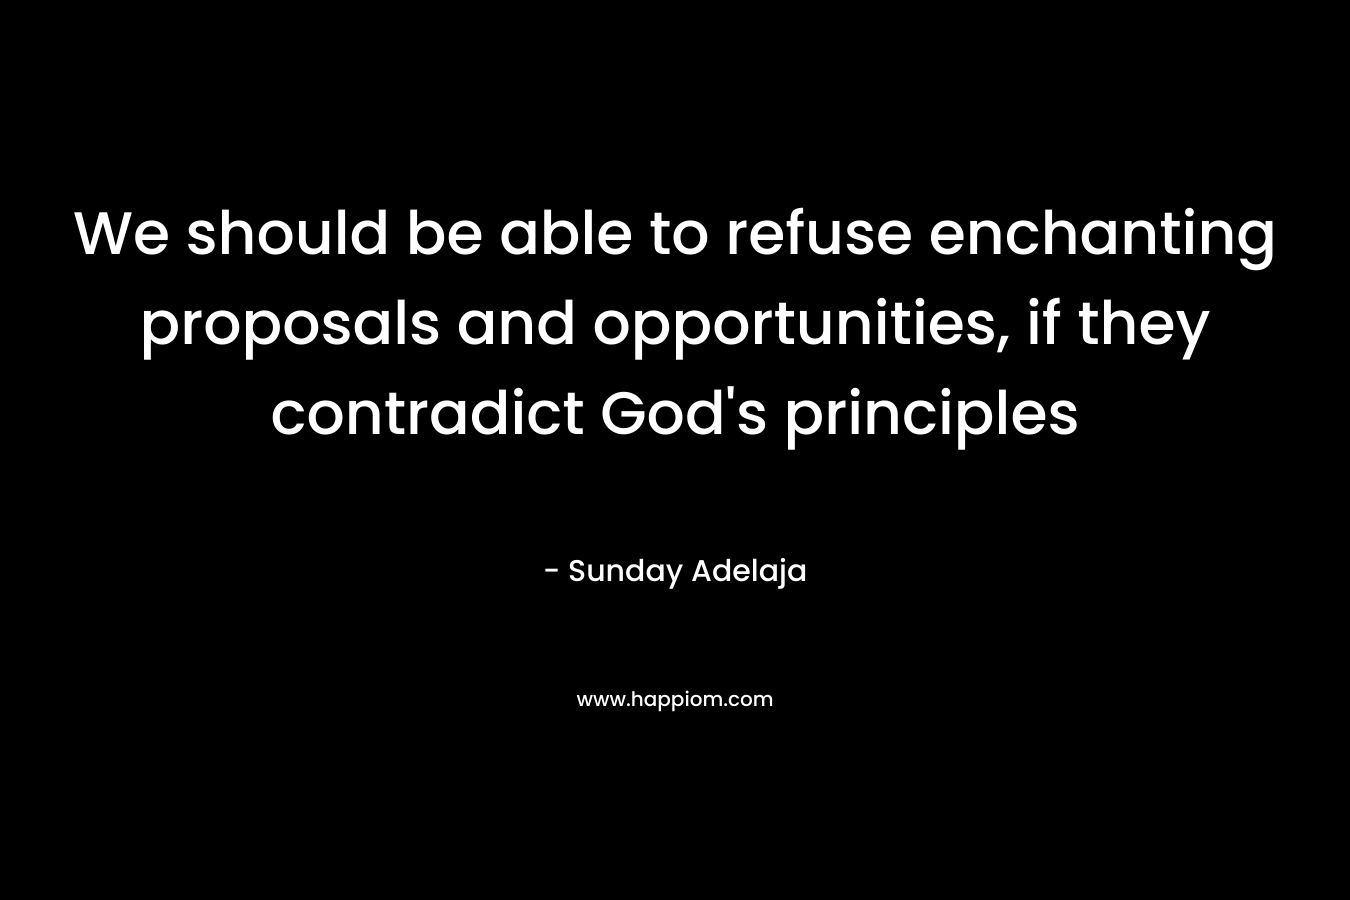 We should be able to refuse enchanting proposals and opportunities, if they contradict God’s principles – Sunday Adelaja